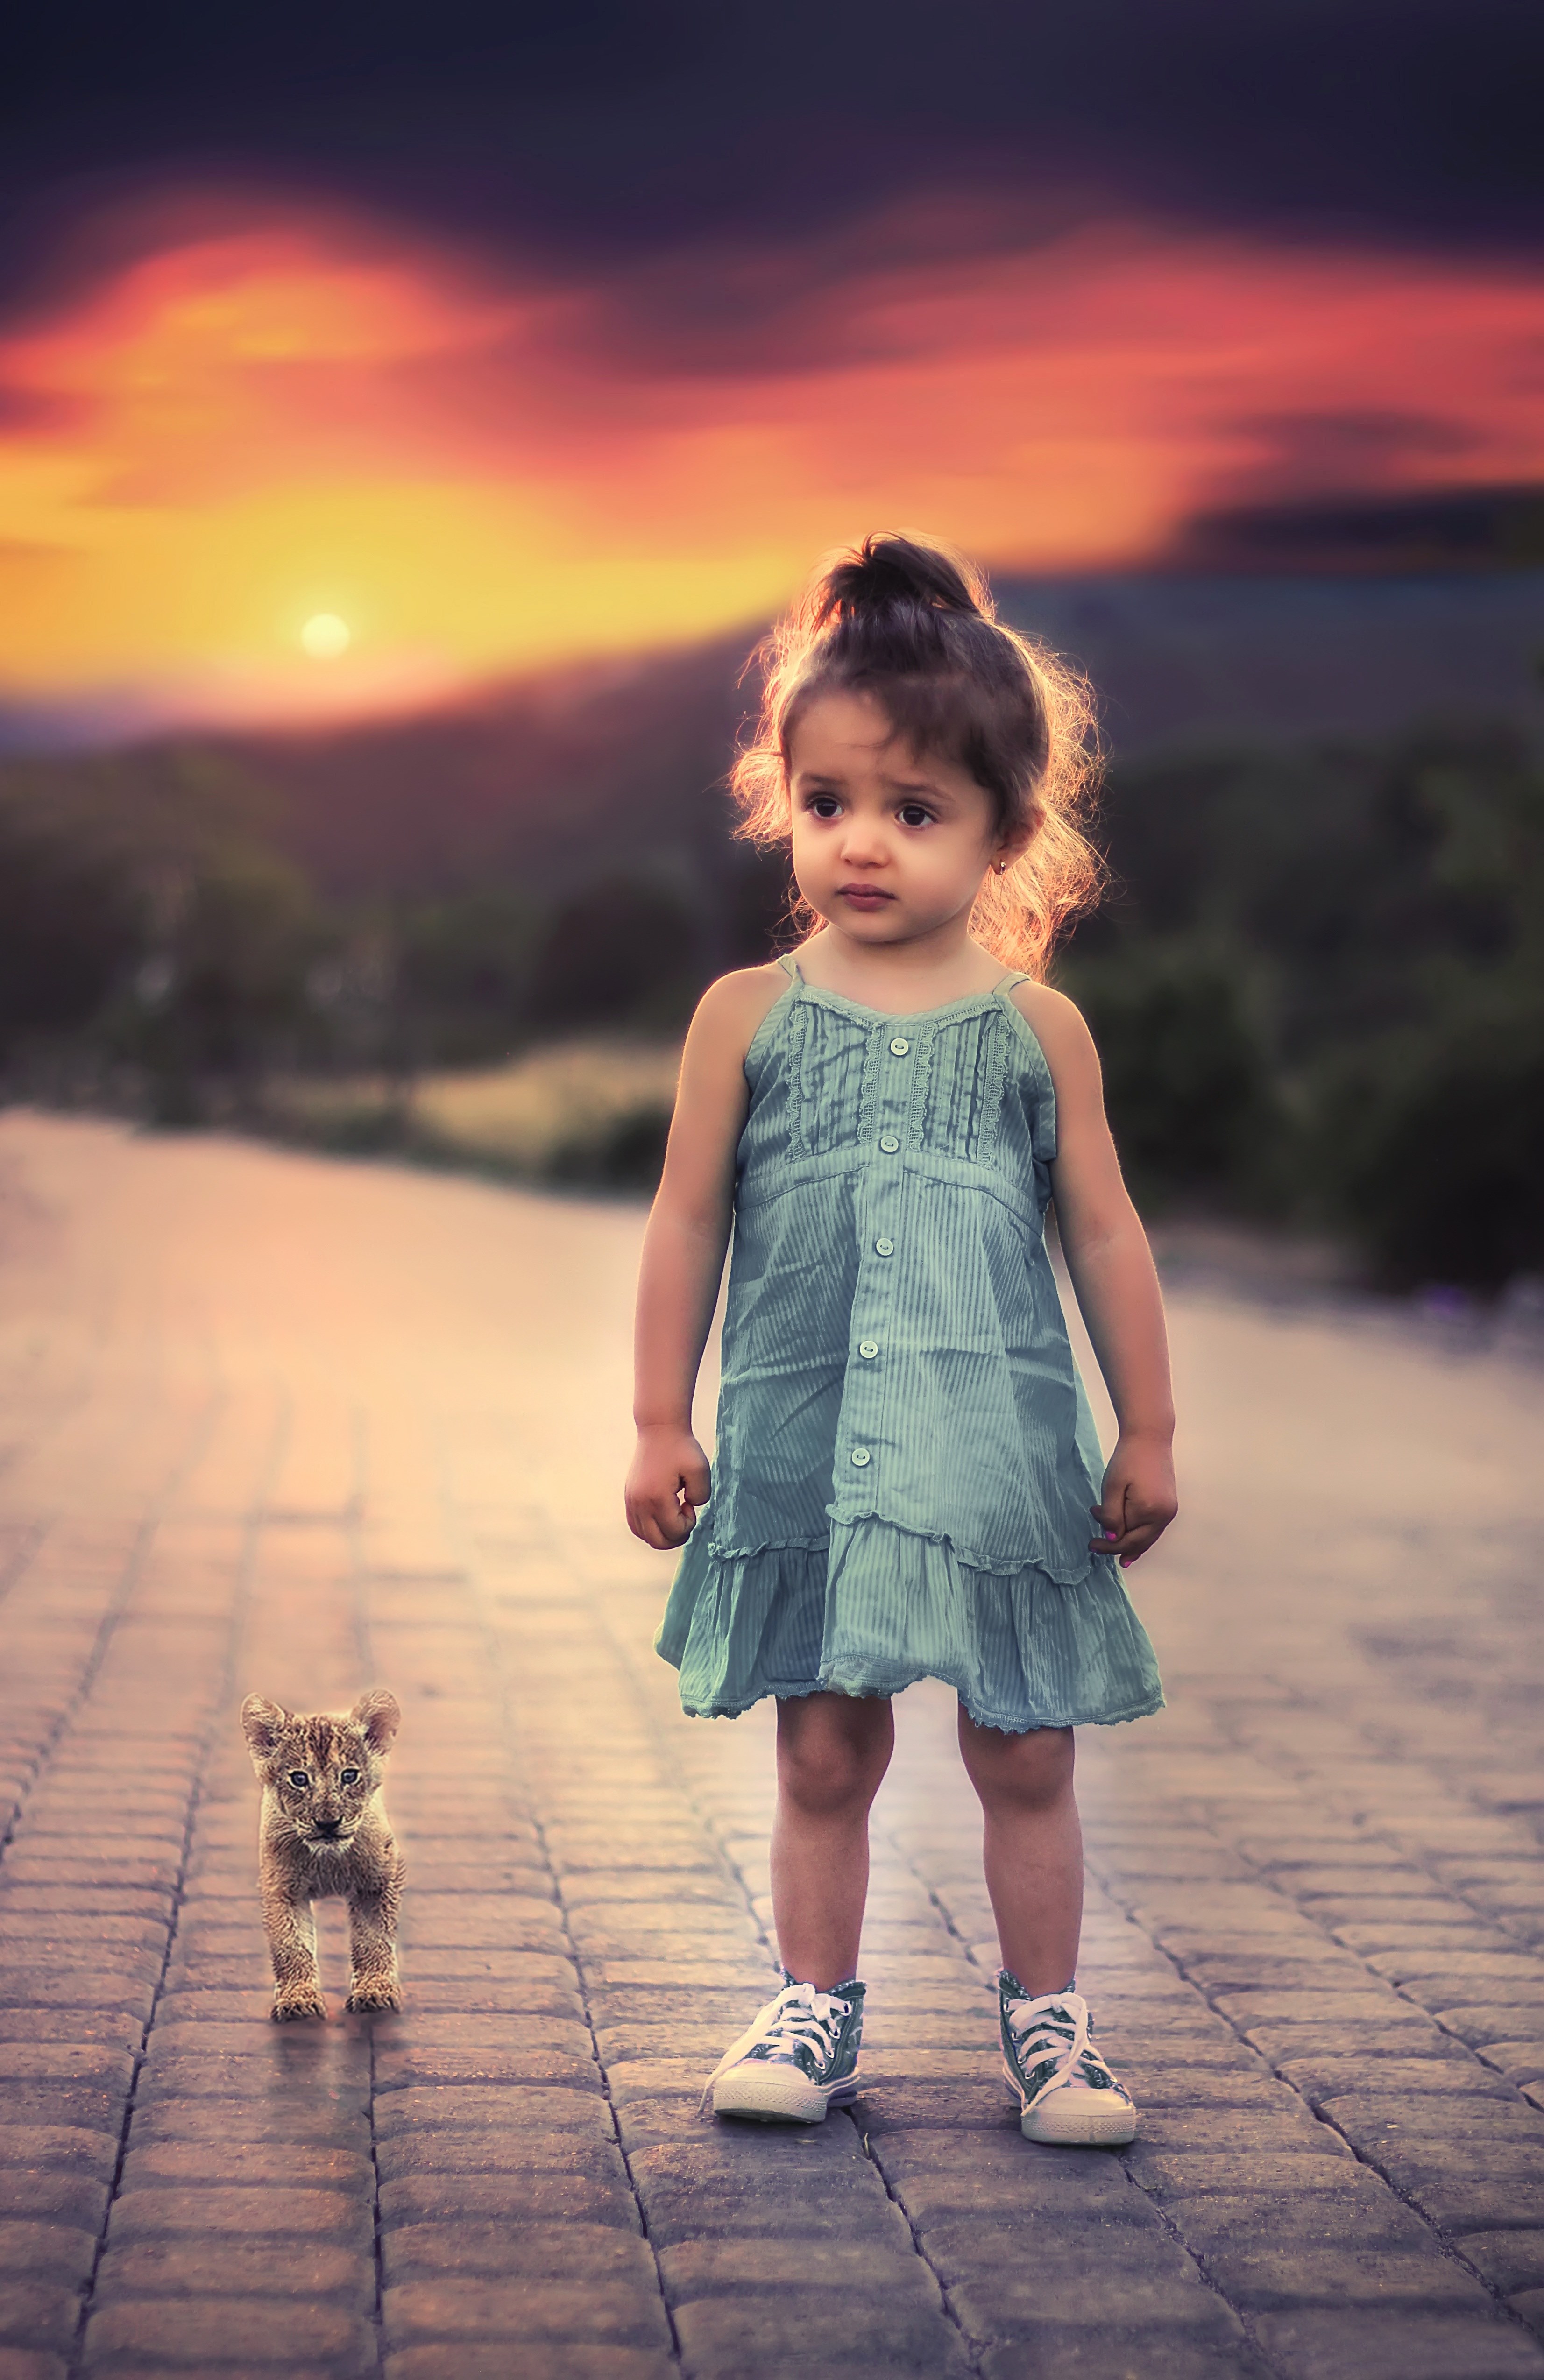 cute baby wallpaper,photograph,child,sky,standing,child model